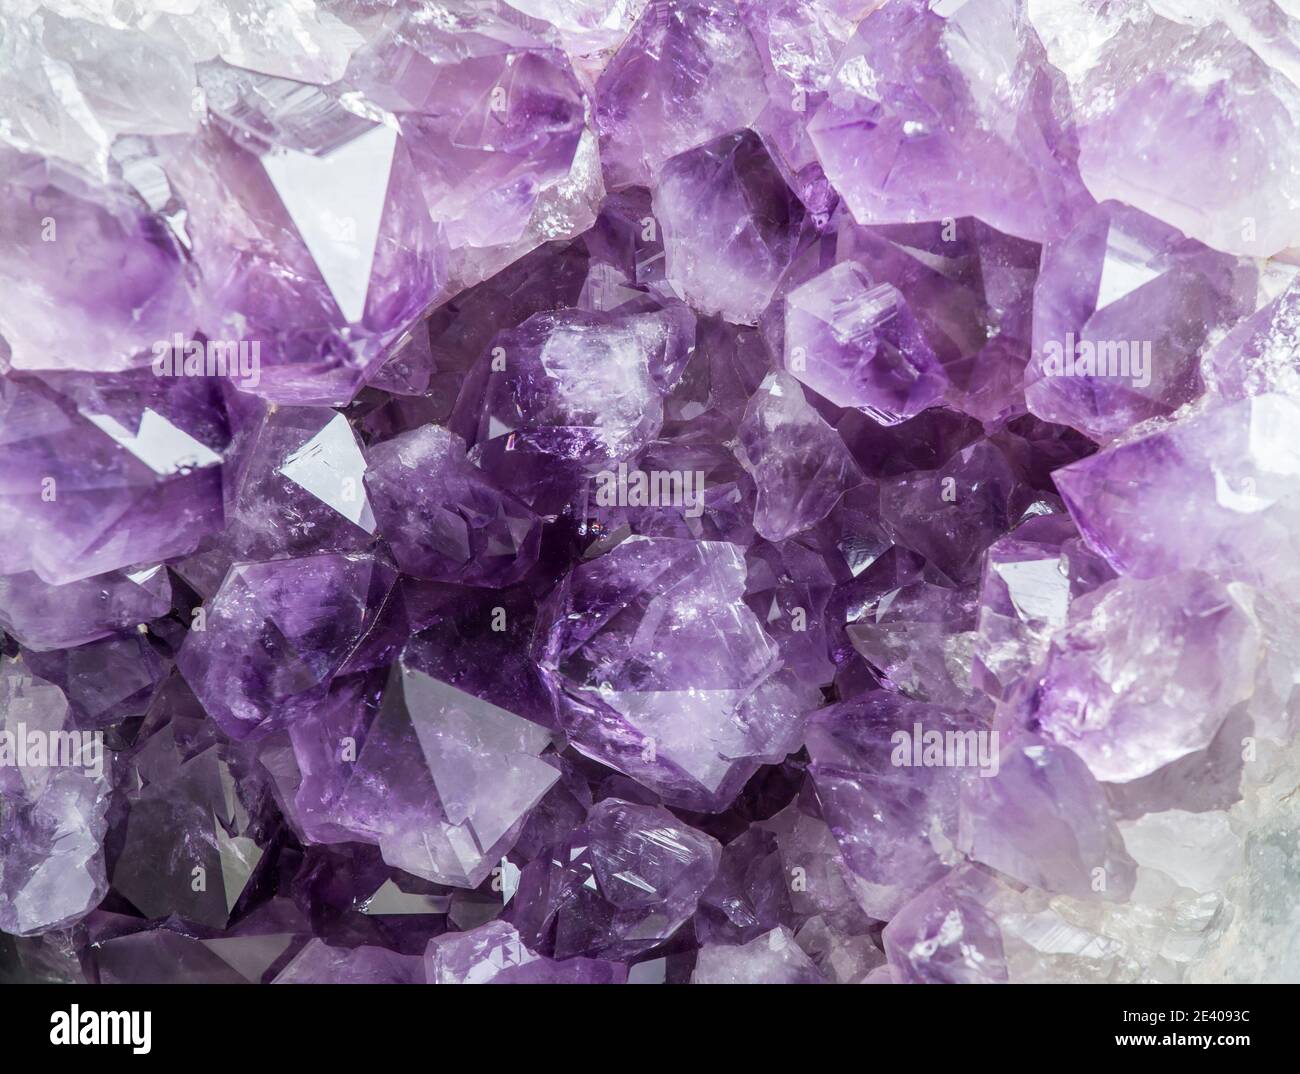 Close up view of large violet amethyst crystal cluster. Esoteric magical background concept. Stock Photo